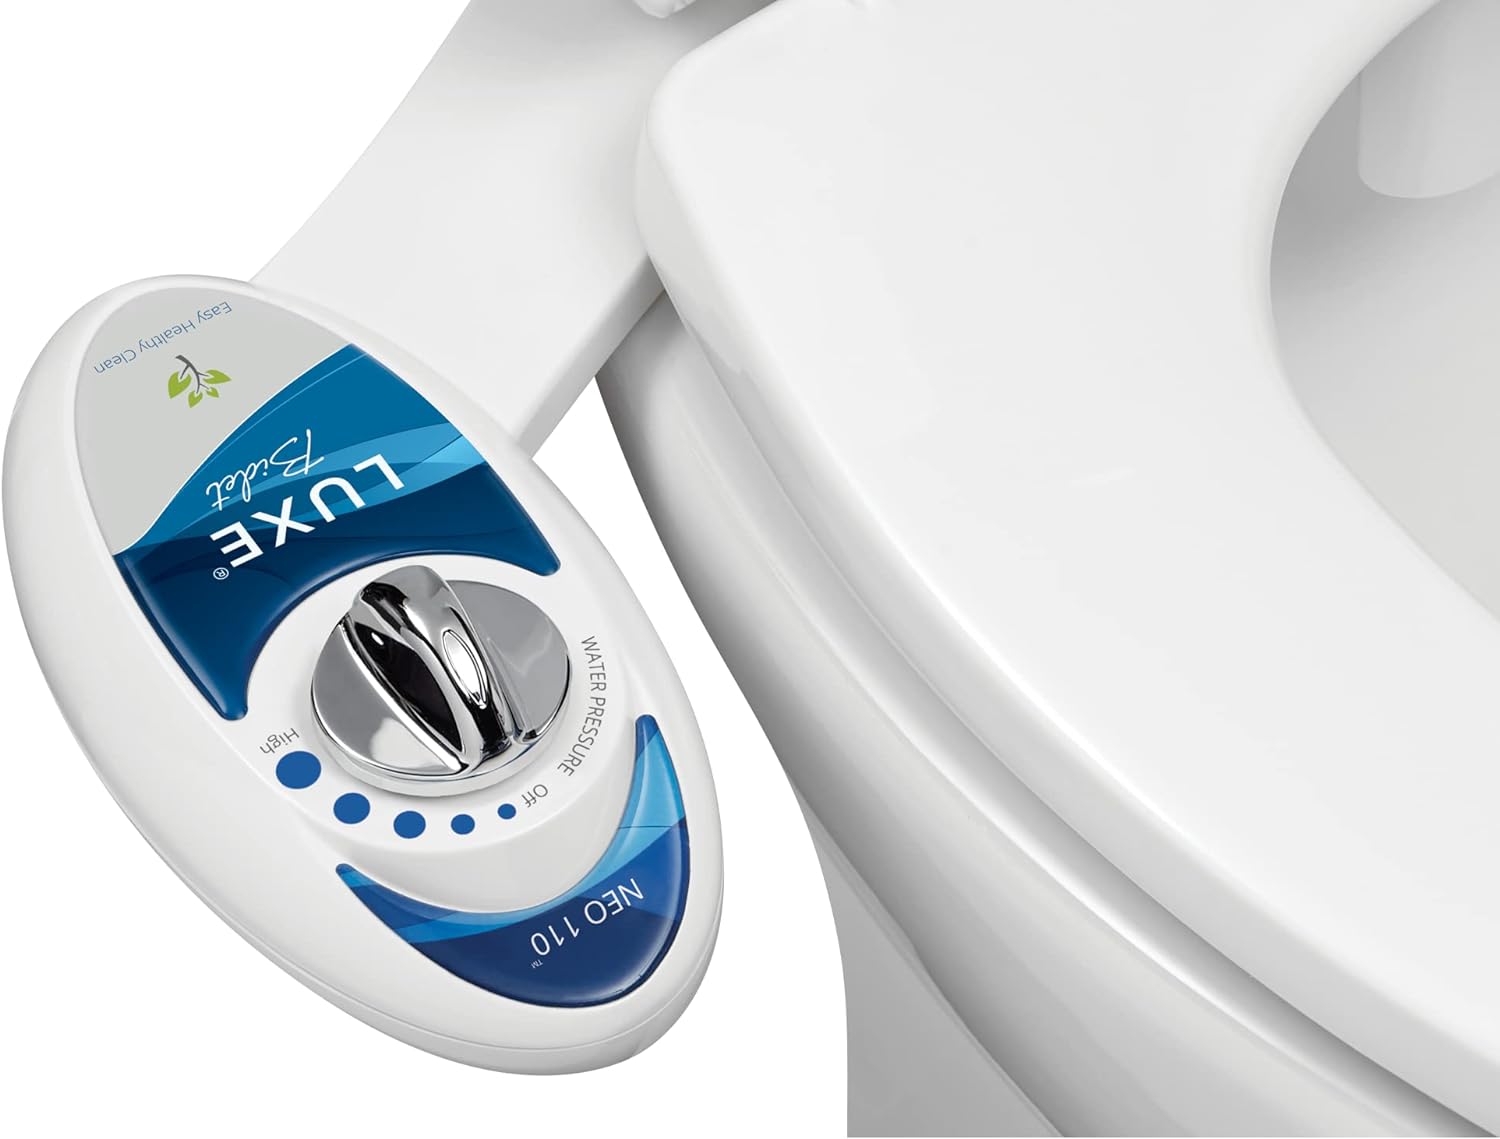 LUXE Bidet NEO 110 - Fresh Water Non-Electric Bidet Attachment for Toilet Seat, Adjustable Water Pre